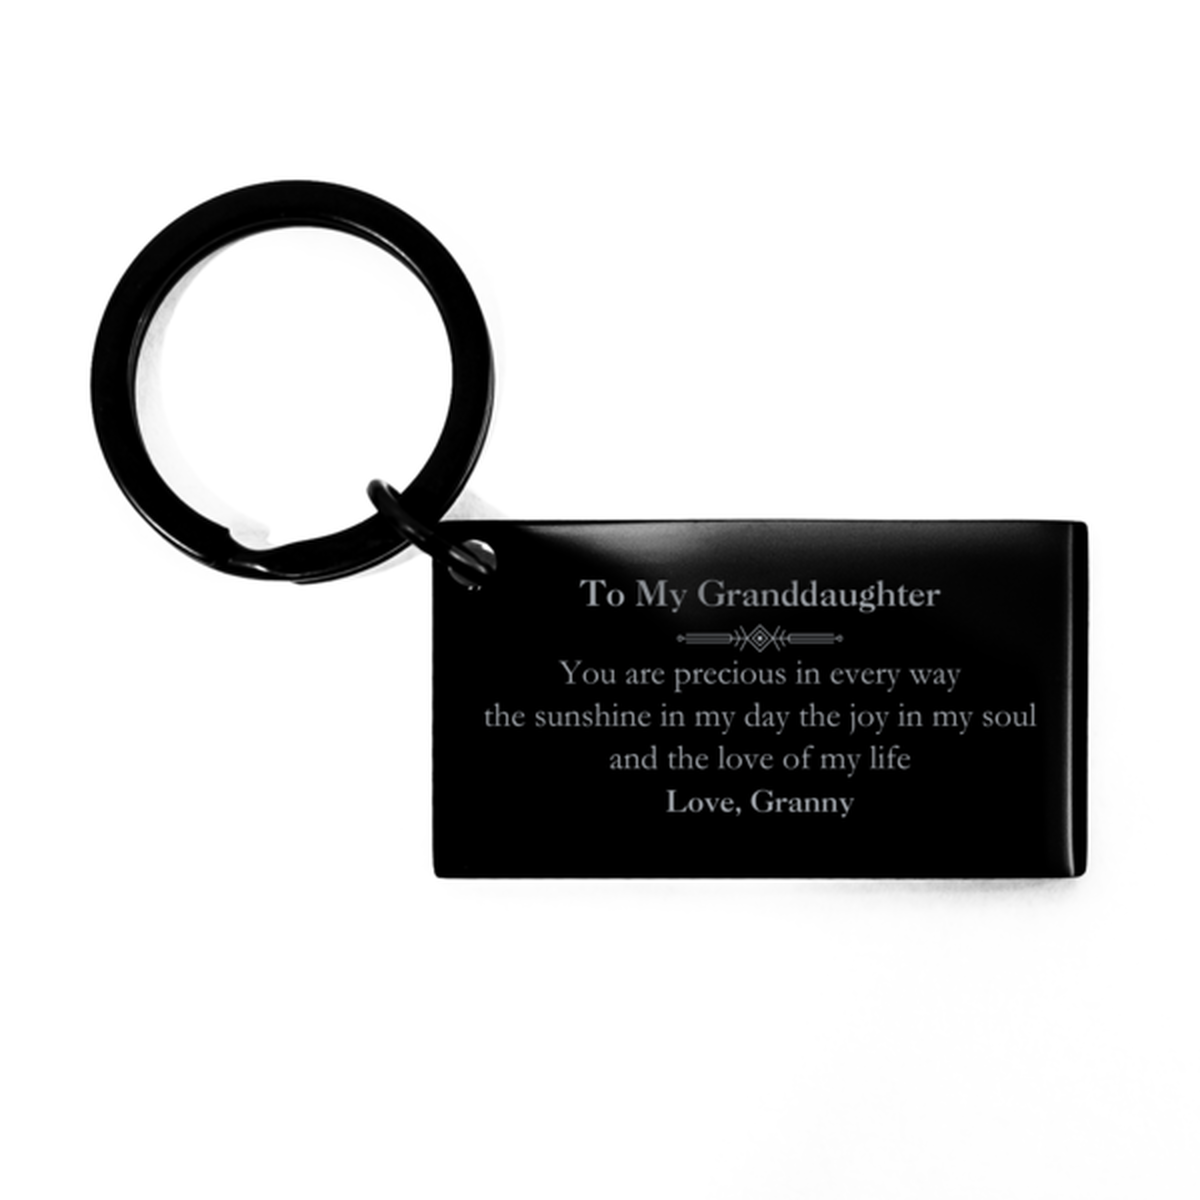 Graduation Gifts for Granddaughter Keychain Present from Granny, Christmas Granddaughter Birthday Gifts Granddaughter You are precious in every way the sunshine in my day. Love, Granny